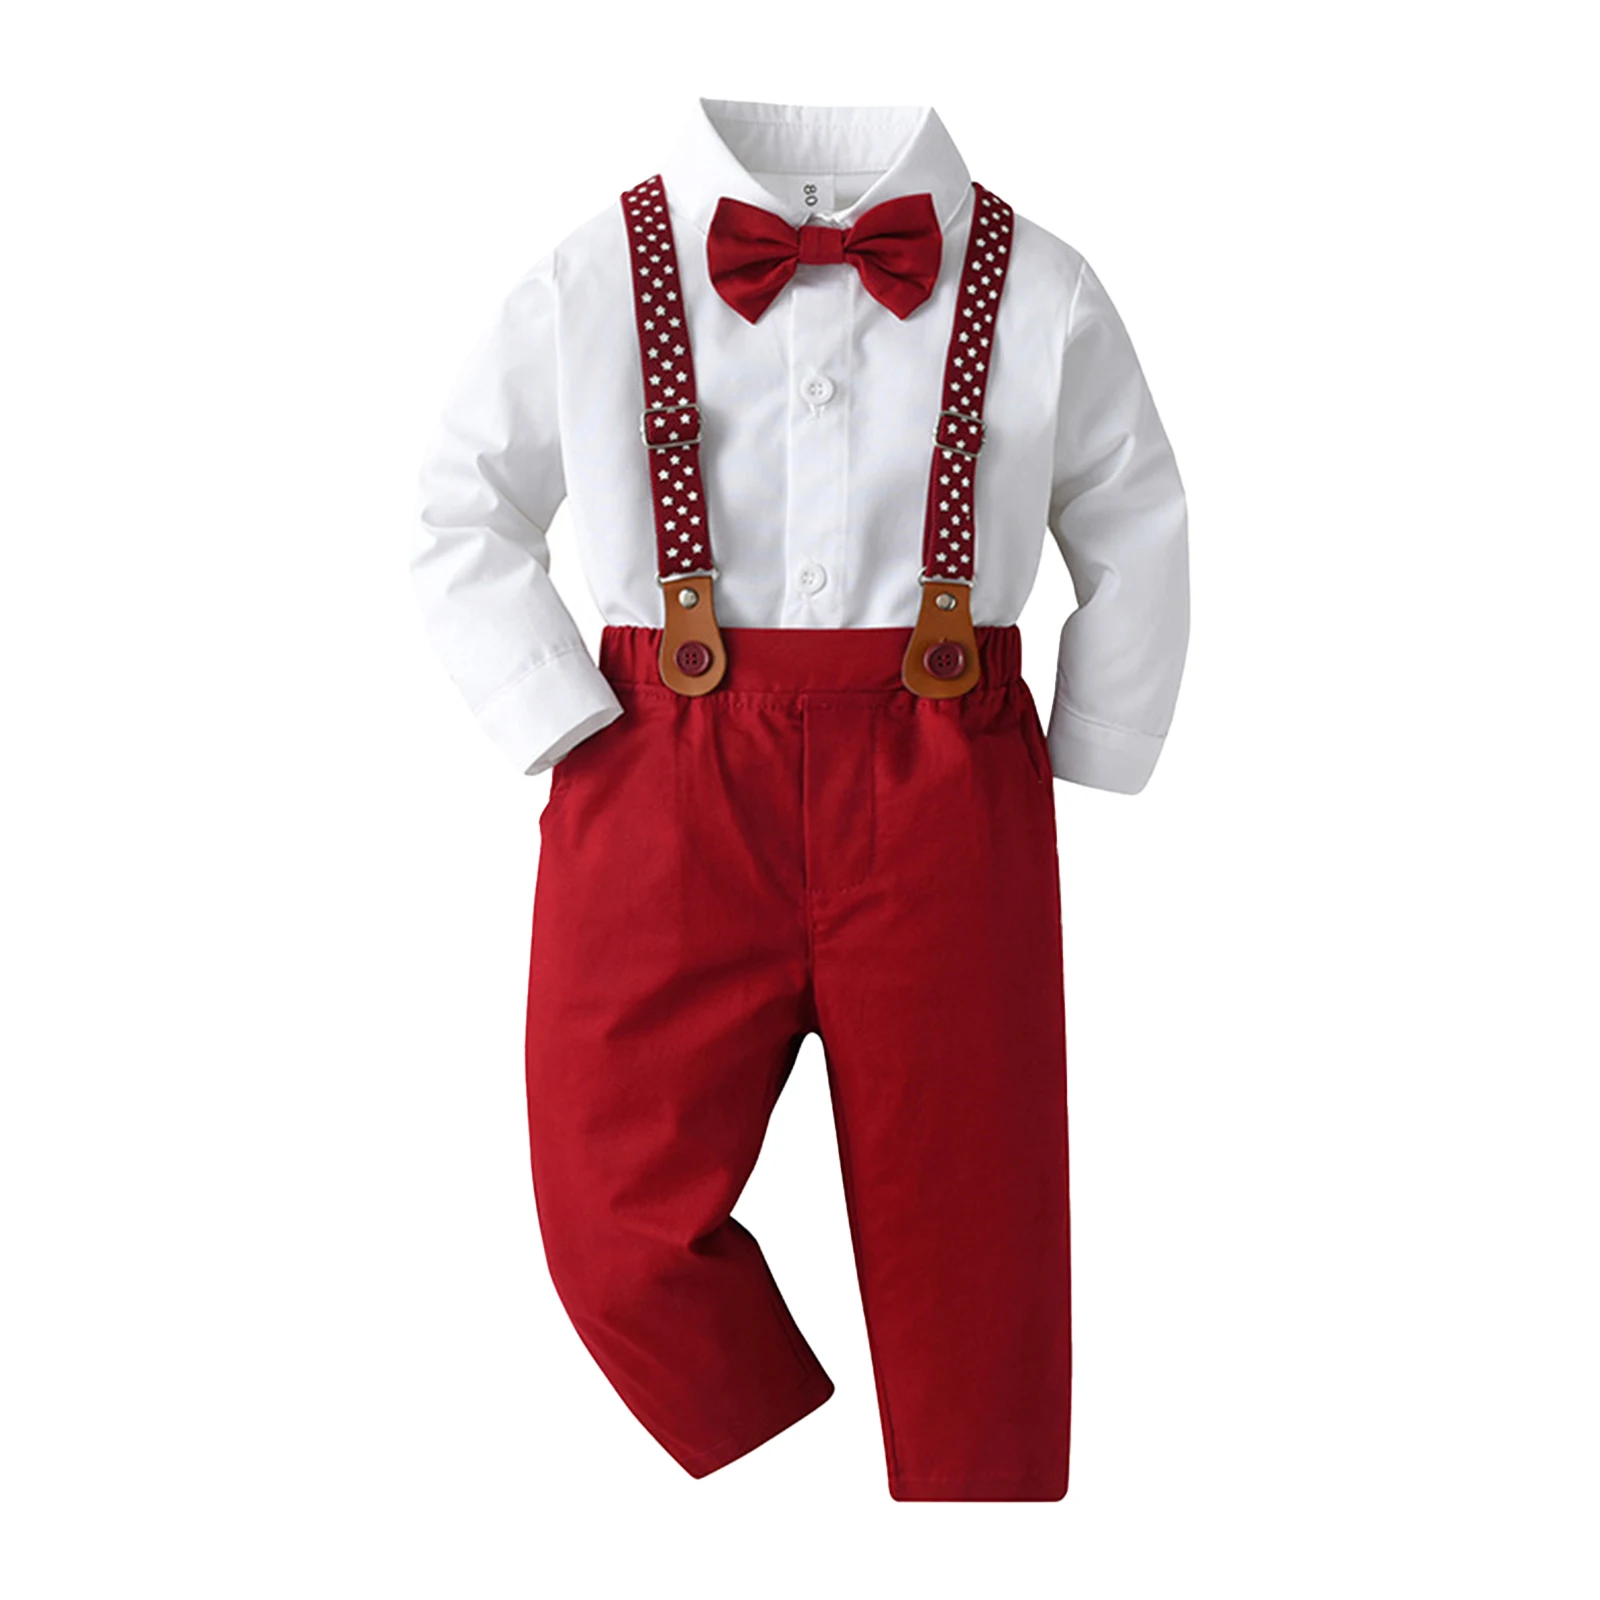 Baby Boys Gentleman Outfit Cotton Clothes Birthday Party Wedding Prom Gown Long Sleeve Shirt Top+Bowtie+Suspender Pants 3Pcs/Set baby boys gentleman outfit cotton clothes birthday party wedding prom gown long sleeve shirt top bowtie suspender pants 3pcs set